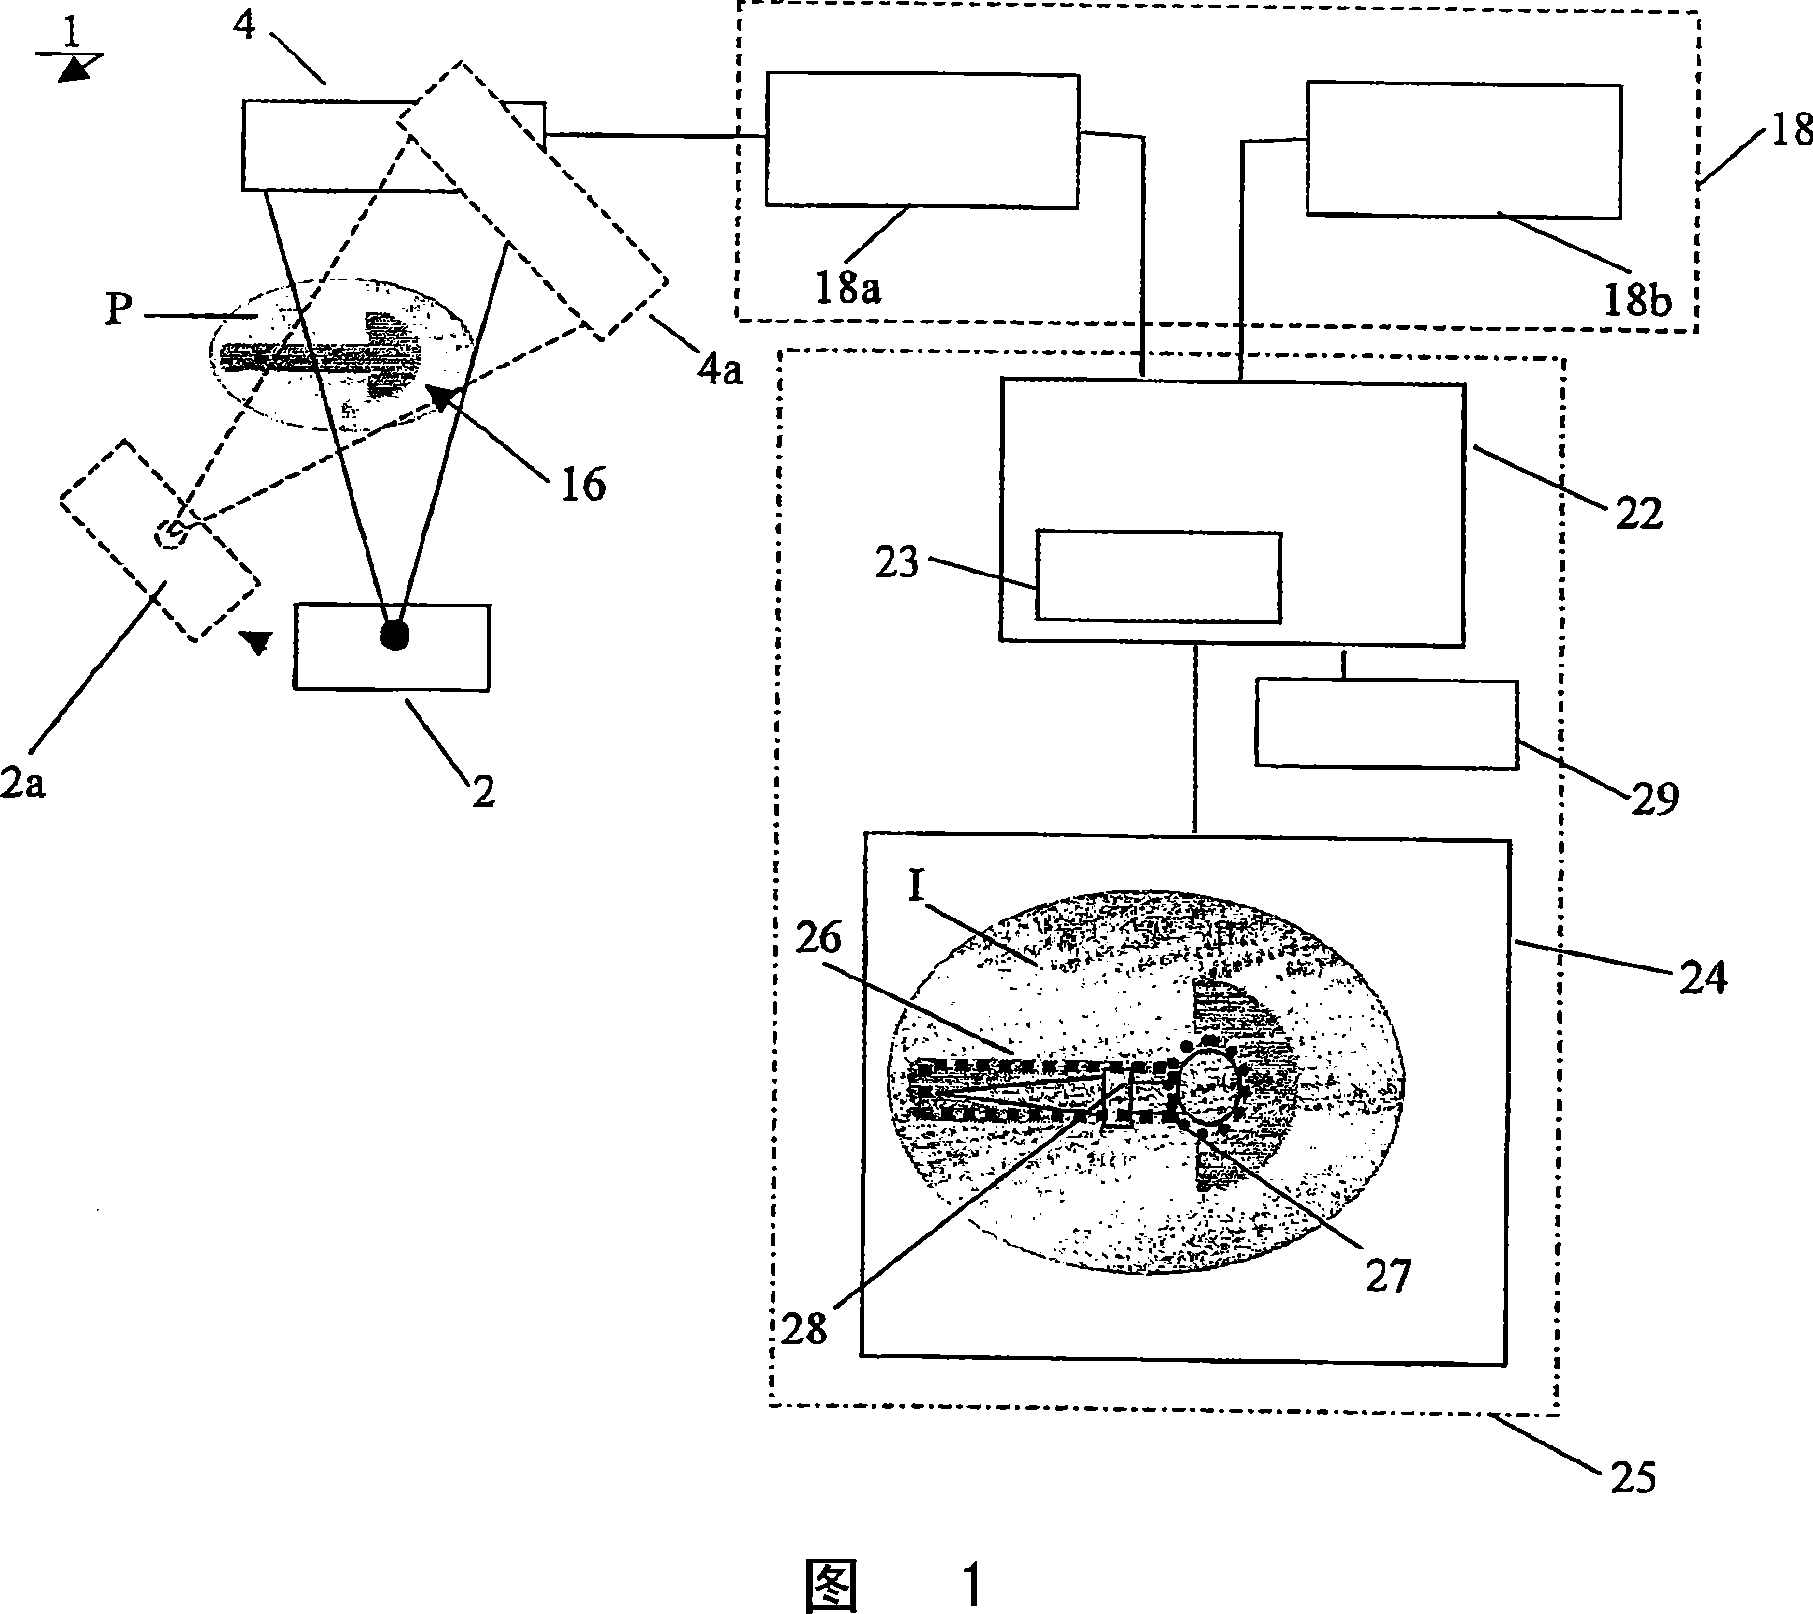 A method, a system and a computer program for validation of geometrical matching in a medical environment